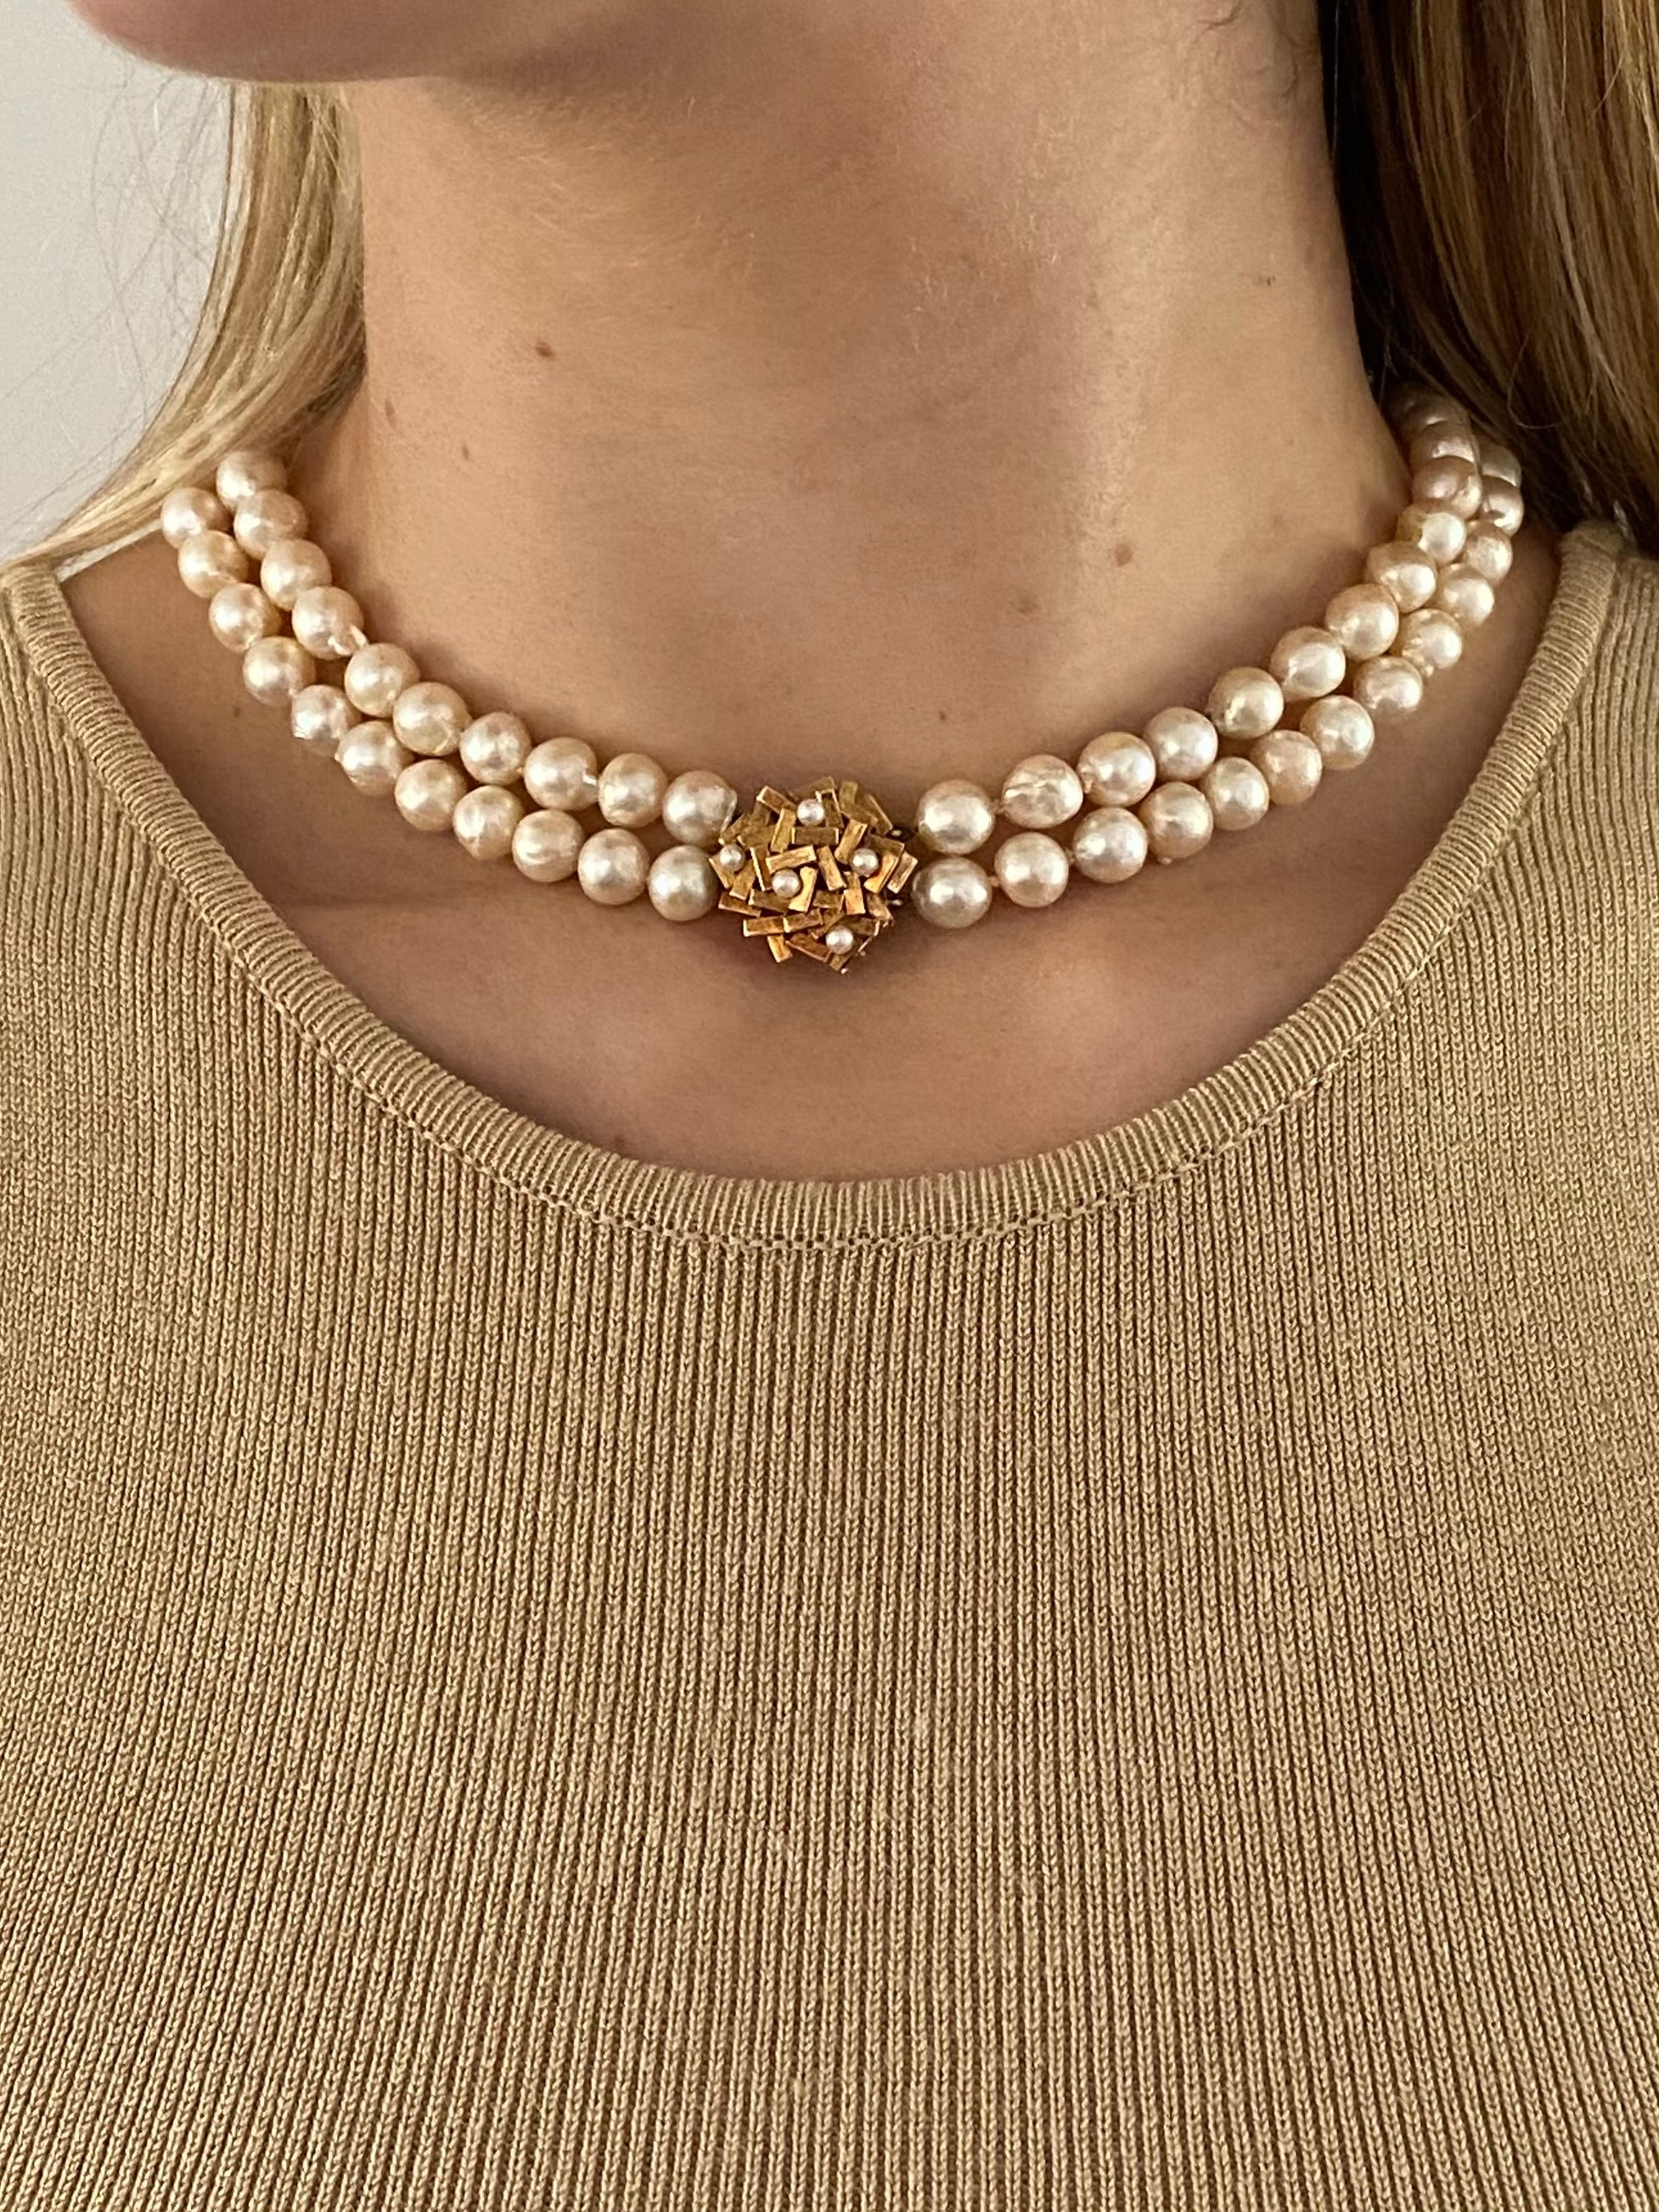 Mid-Century Cultured Pearl Necklace, 1960's